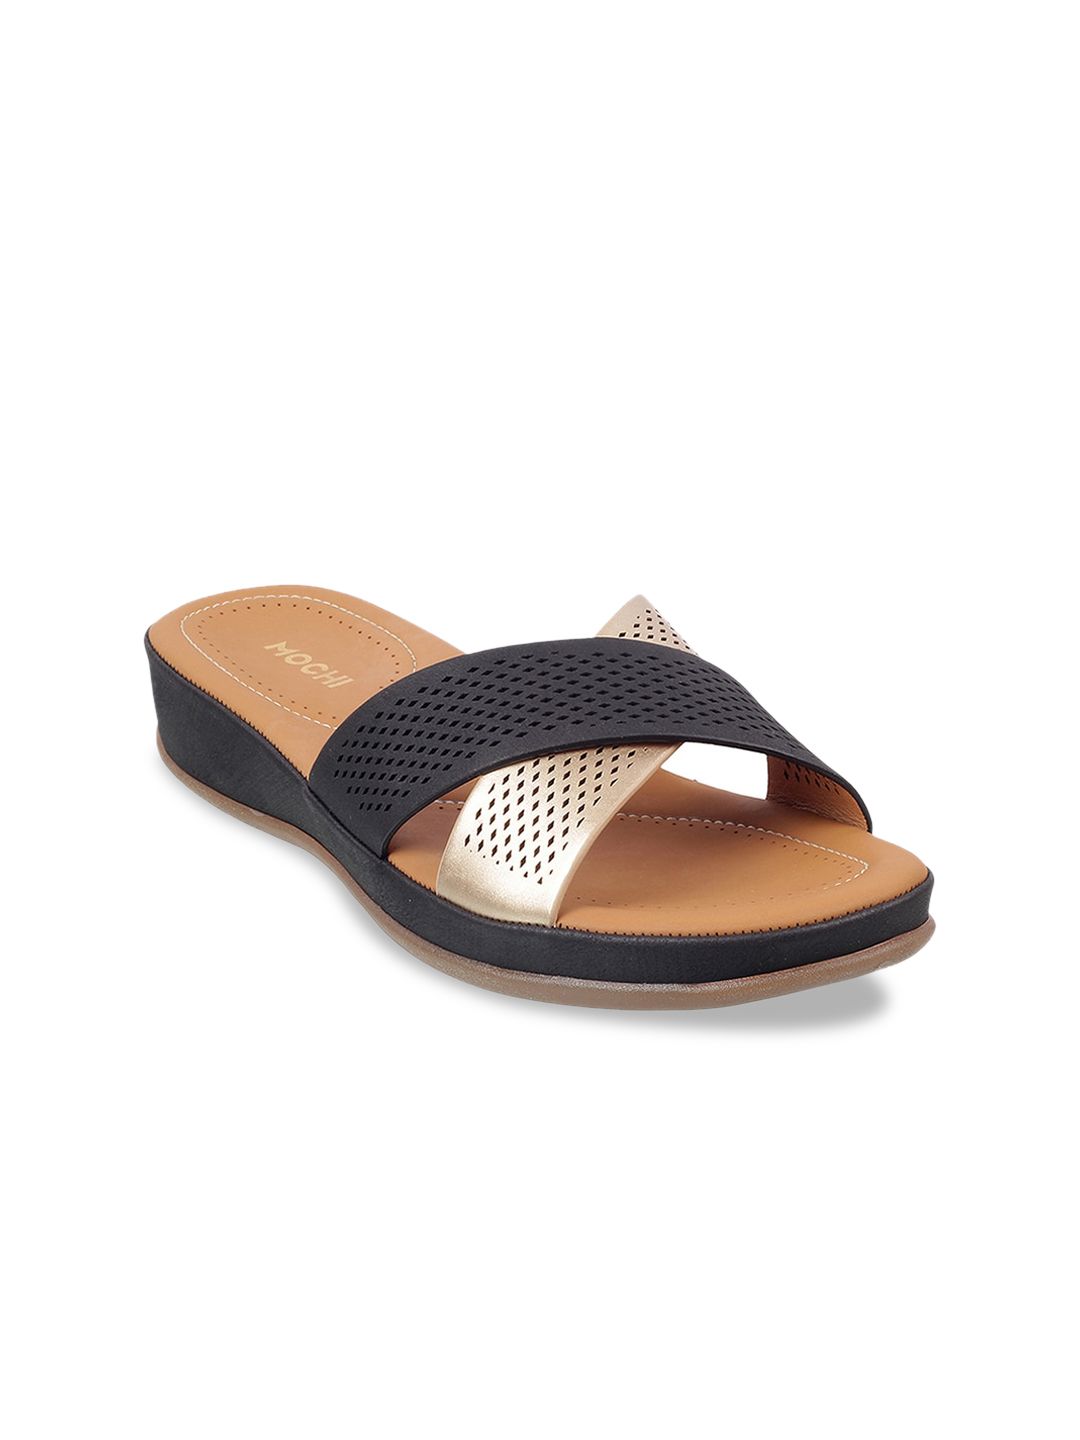 Mochi Women Black & Muted Gold-Toned Colourblocked Wedges Price in India